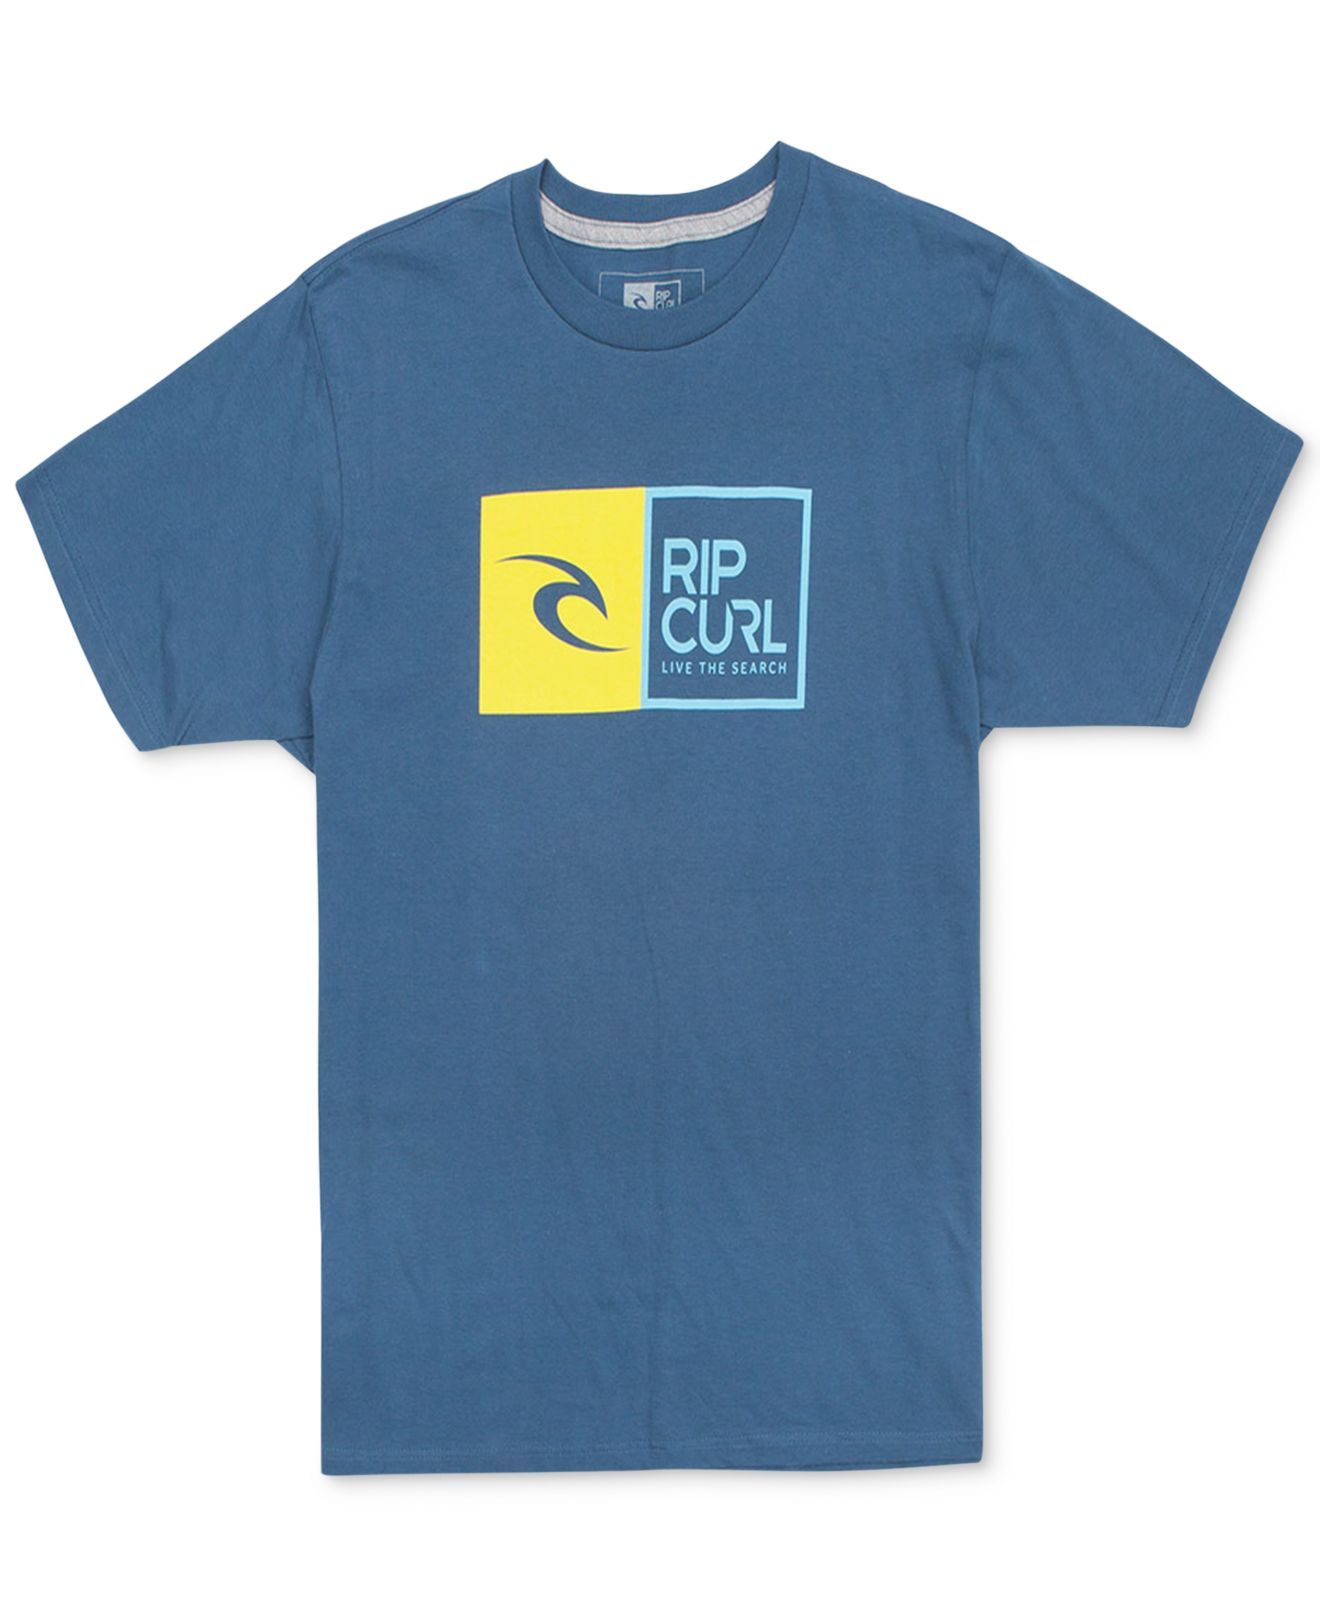 Lyst - Rip Curl Logo Graphic T-shirt in Blue for Men